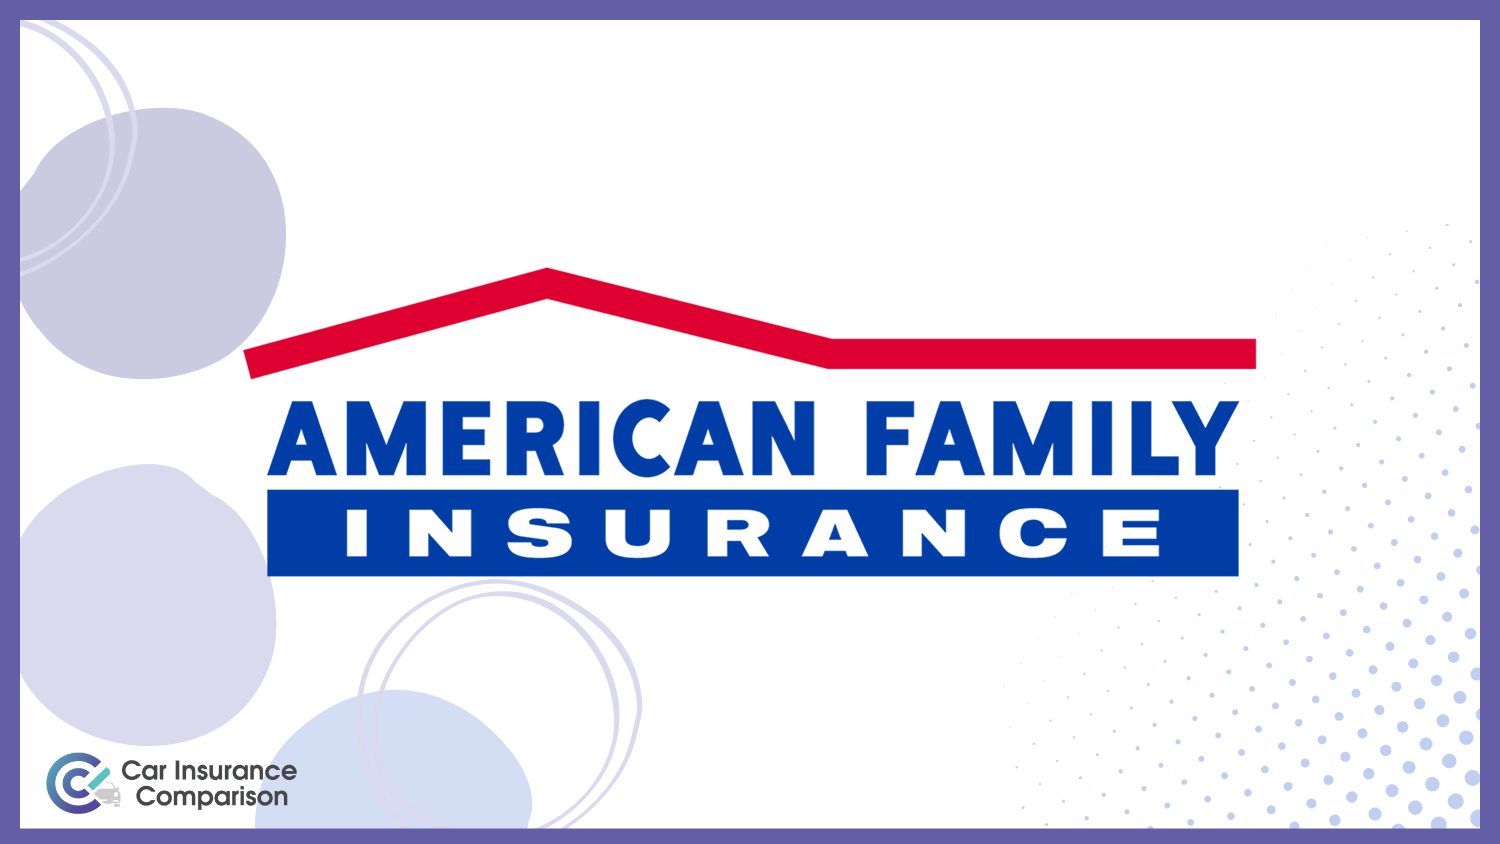 American Family: Best Car Insurance for Foreigners